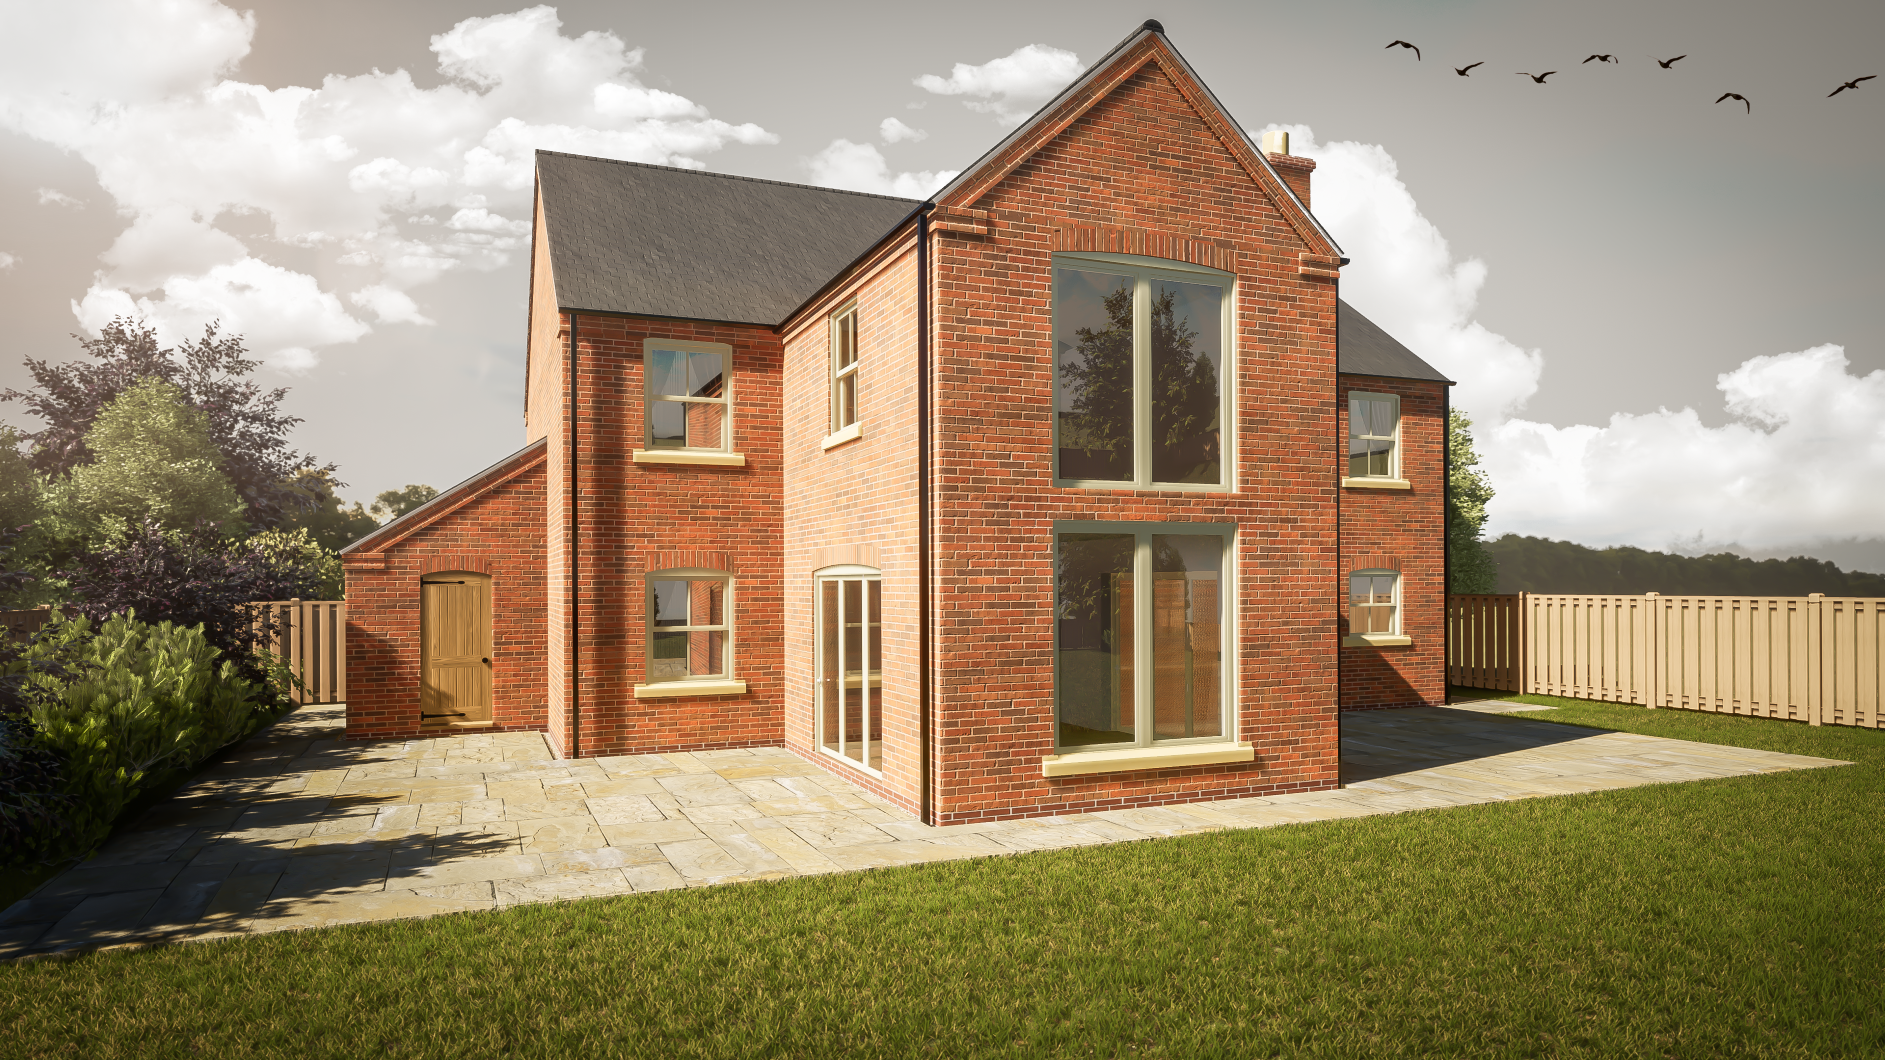 Planning Applications for new homes and residential sites in Lincolnshire - Fytche-Taylor Planning - your local specialists